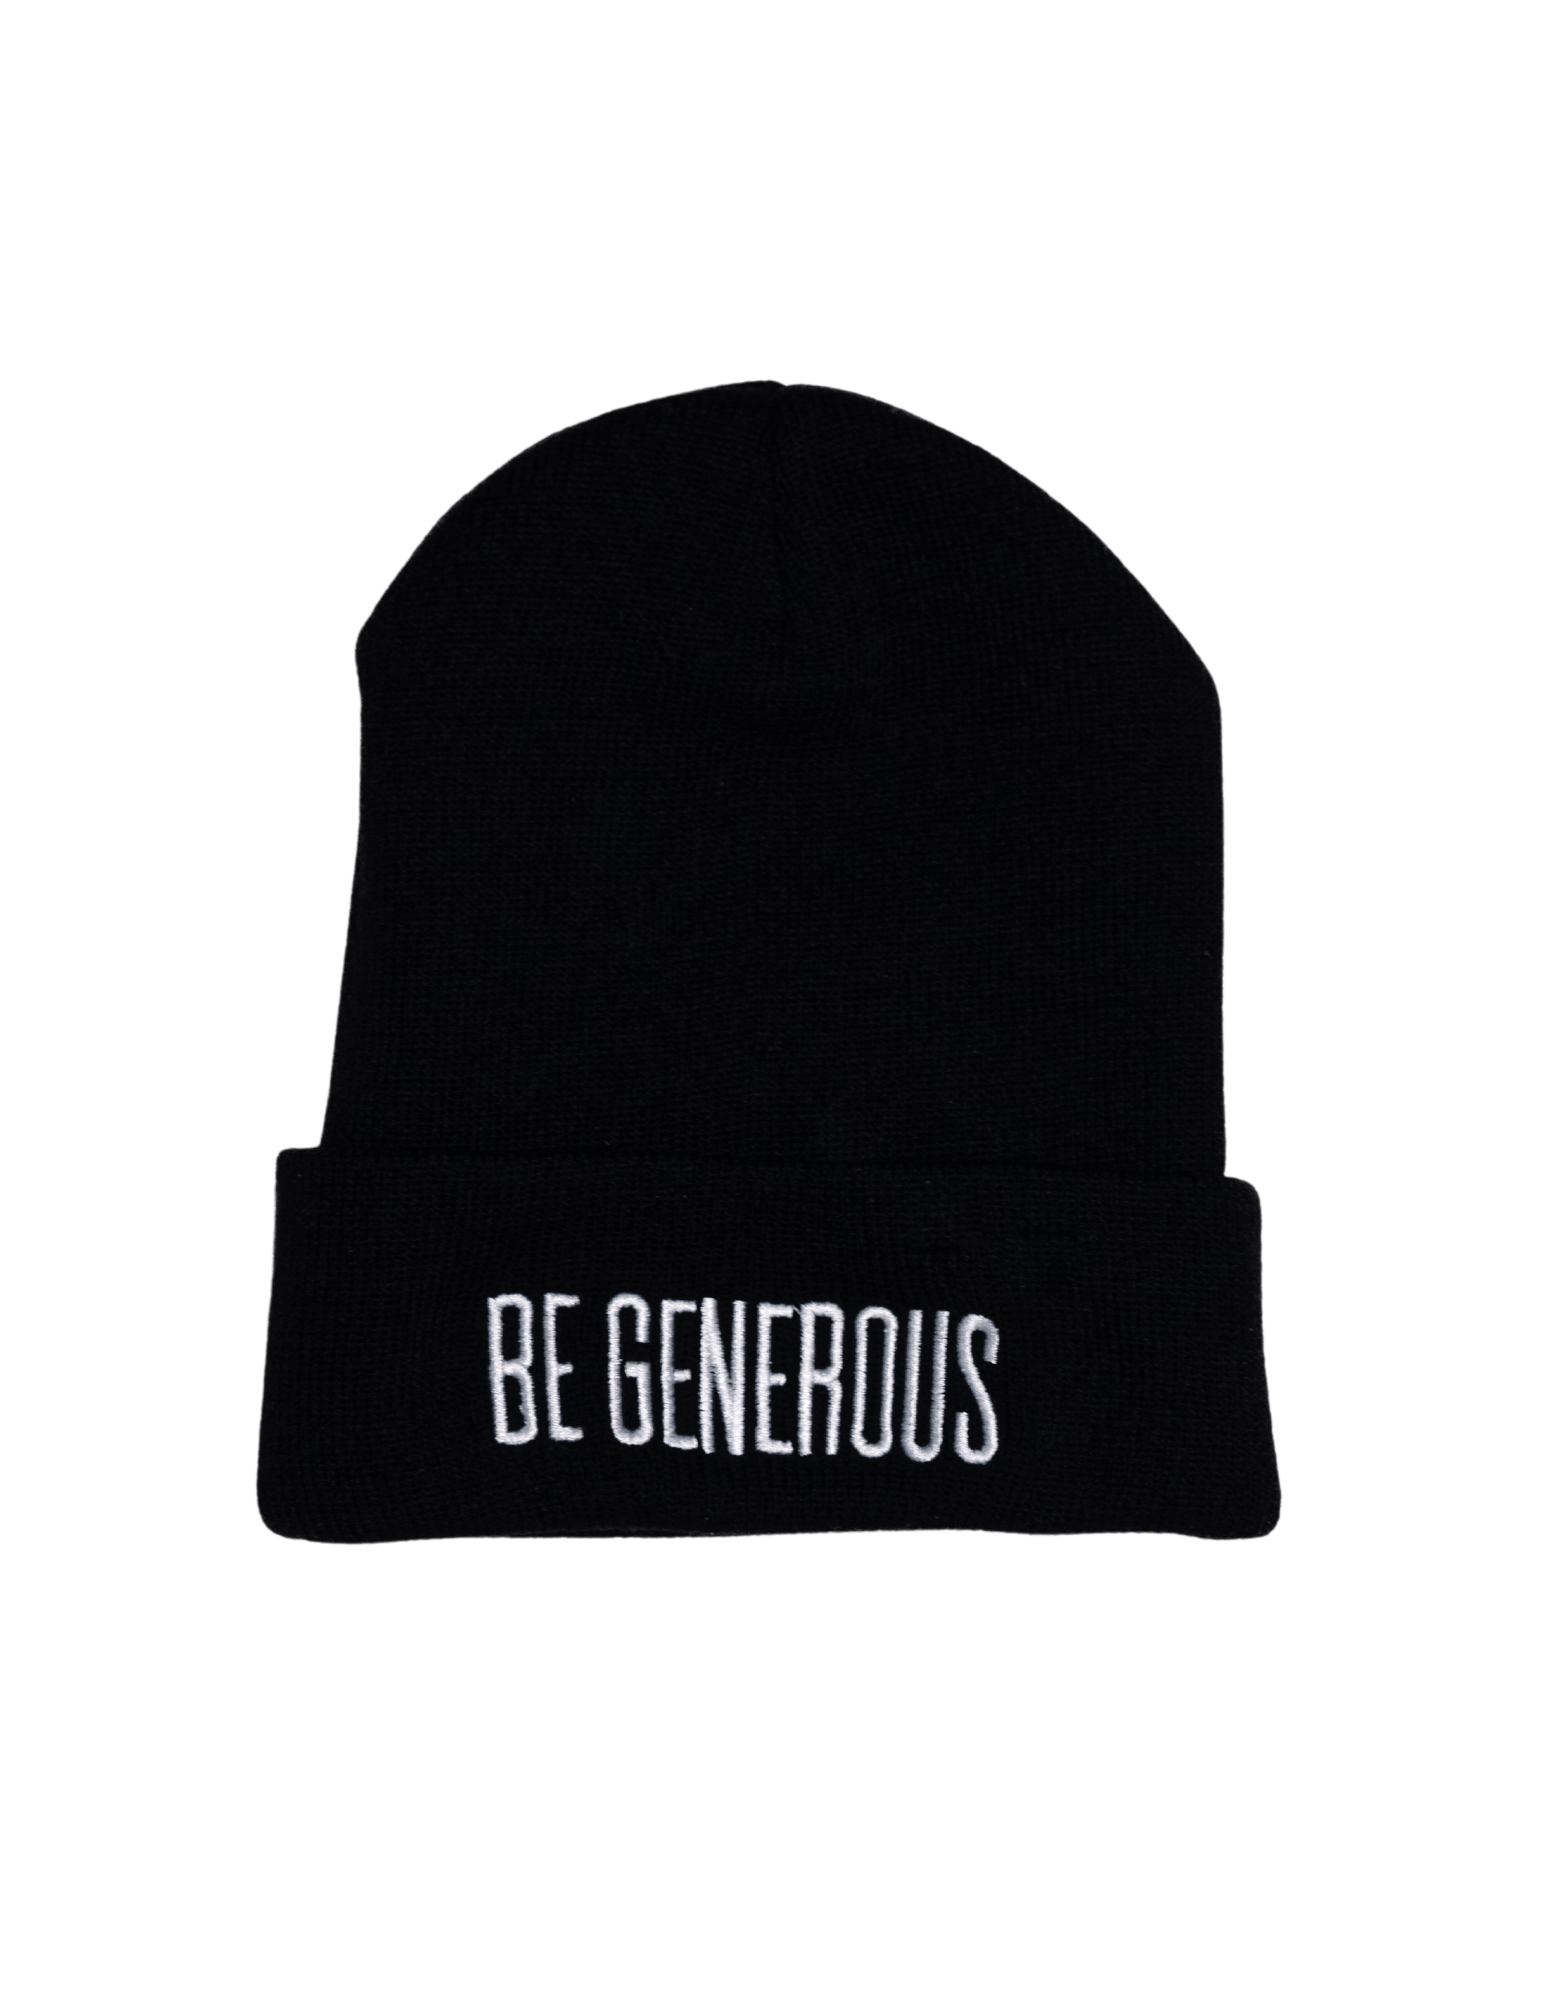 Be Generous - Embroidered Knit Beanie